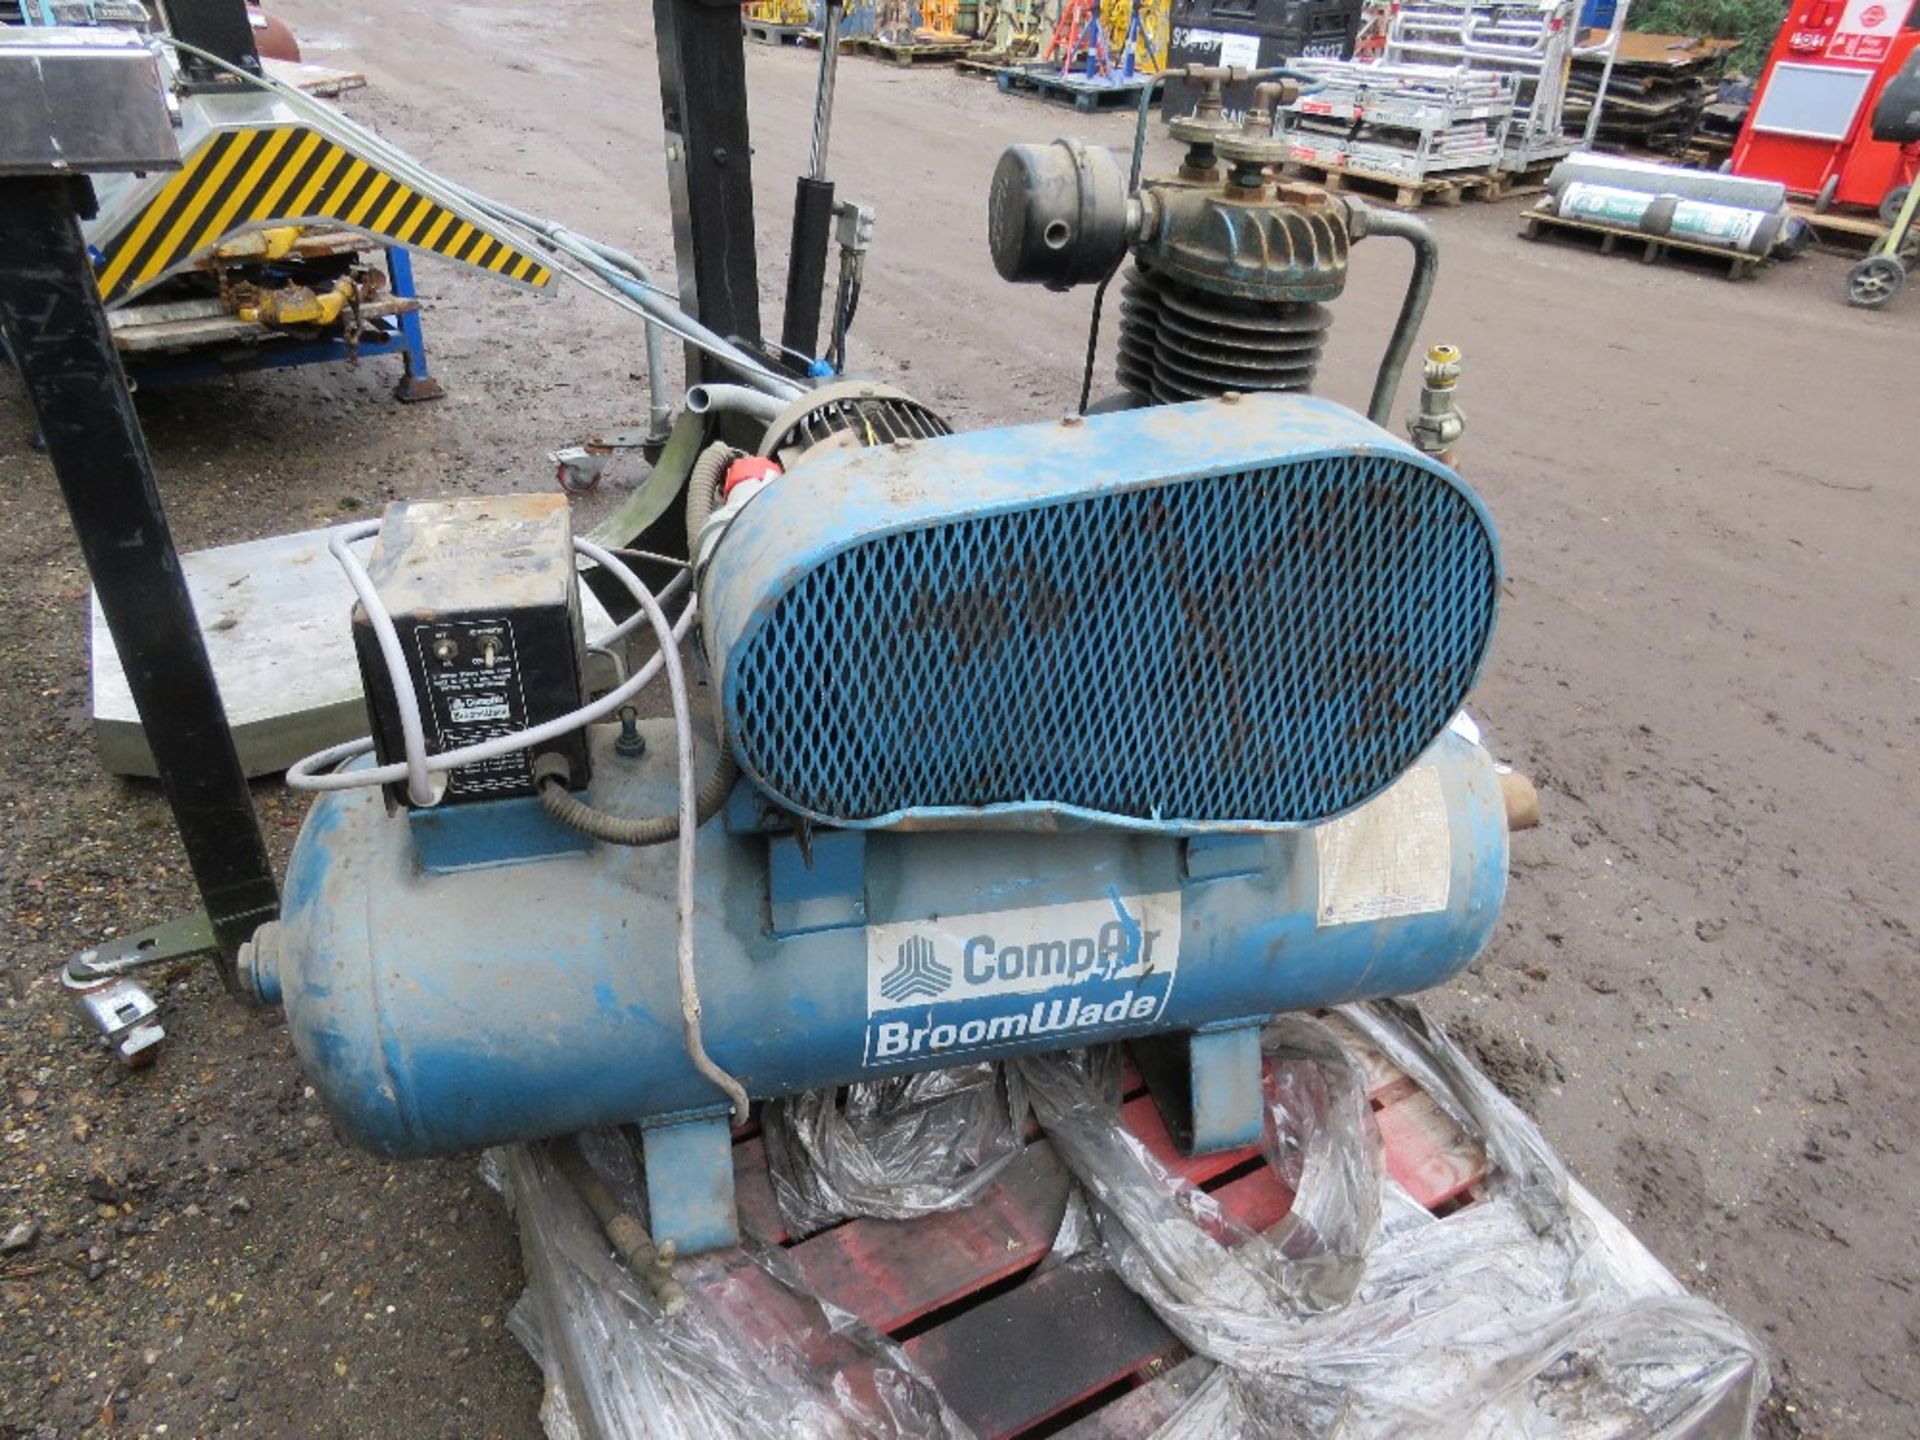 BROOMWADE COMPAIR 3 PHASE POWERED COMPRESSOR. - Image 3 of 4